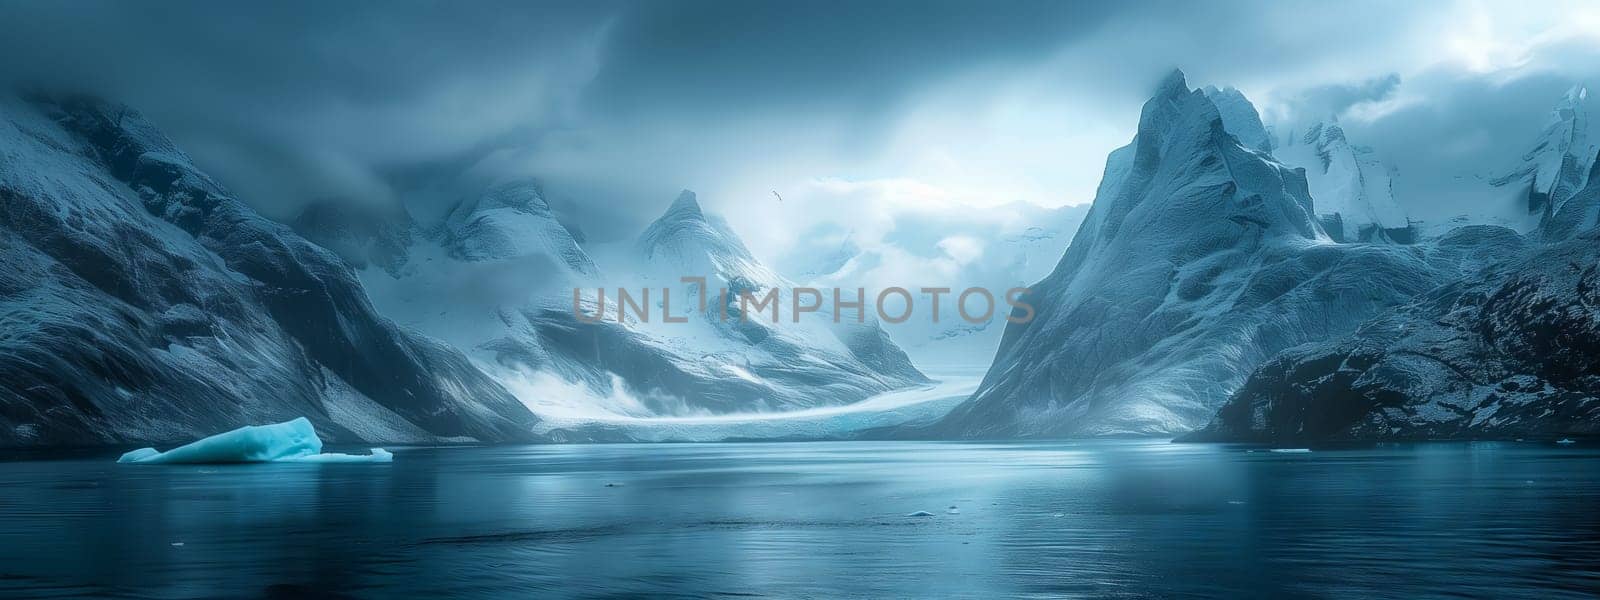 Iceberg in lake among mountains, surrounded by natural landscape by richwolf